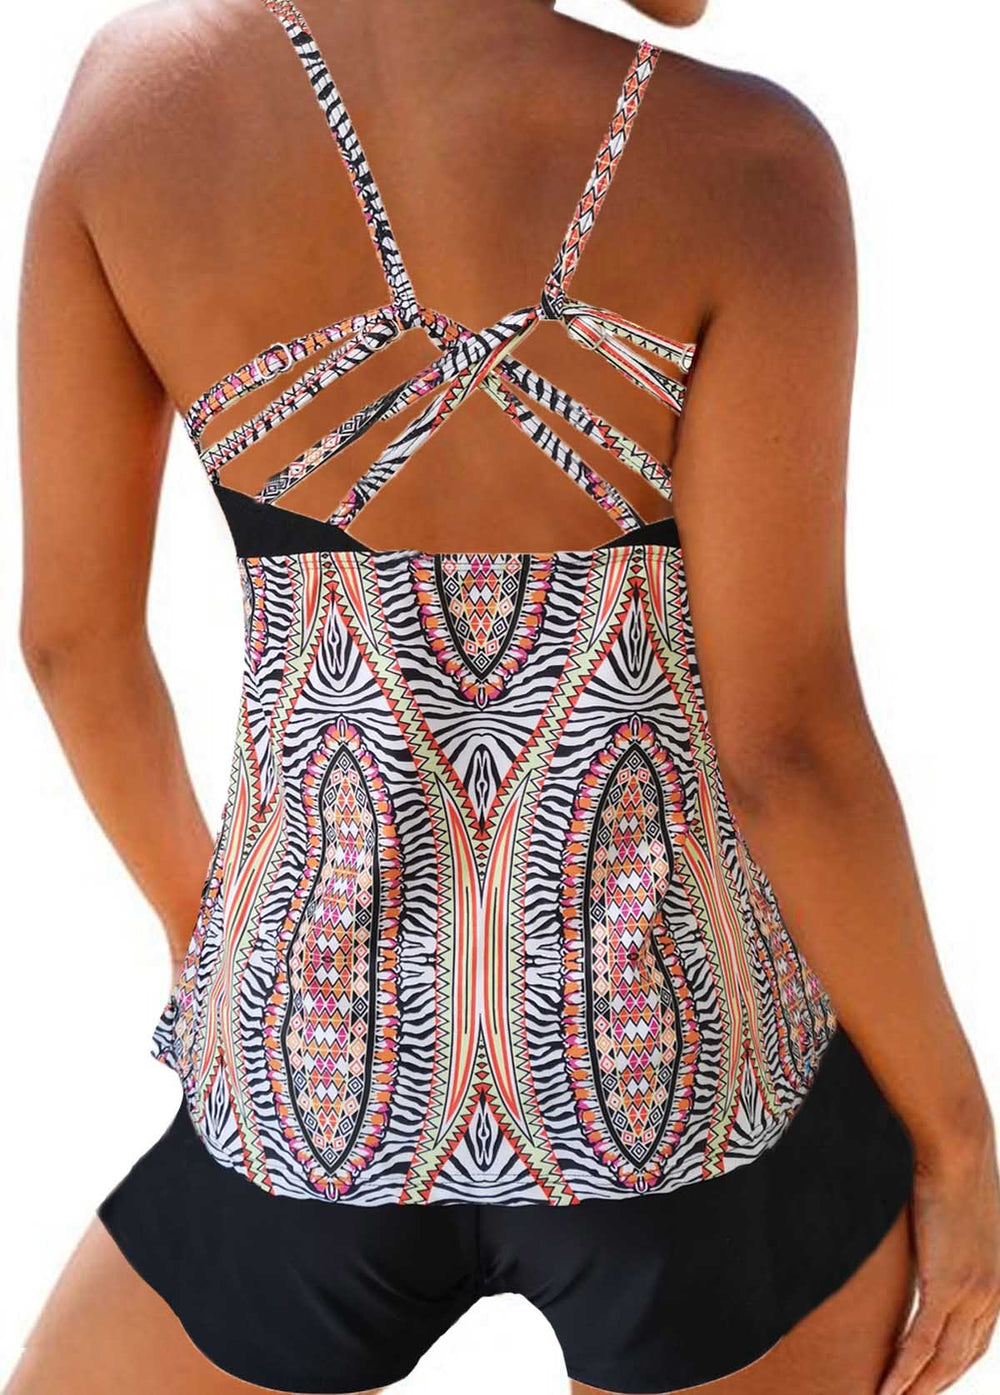 Strappy Back Printed Tankini Top and Shorts - fashionyanclothes